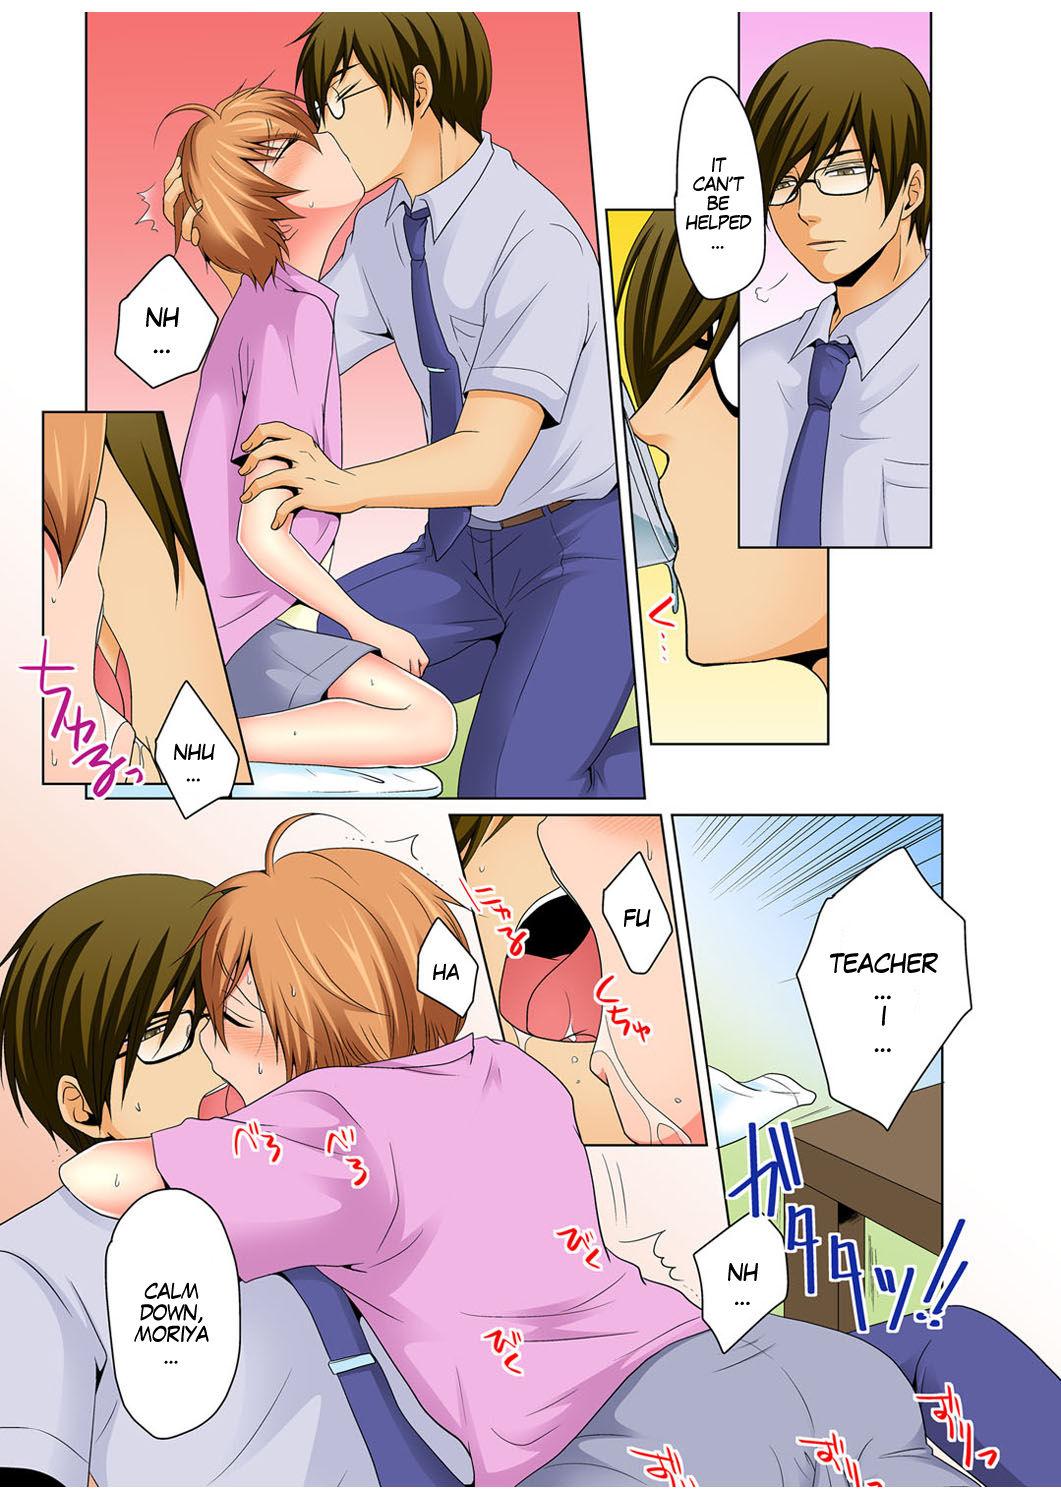 Female Orgasm Nyotaika de Ecchi Kenshin!? Mirudake tte Itta no ni... 3 | Gender Bender Into Sexy Medical Examination! You said that you were only going to look... 3 Chat - Page 3